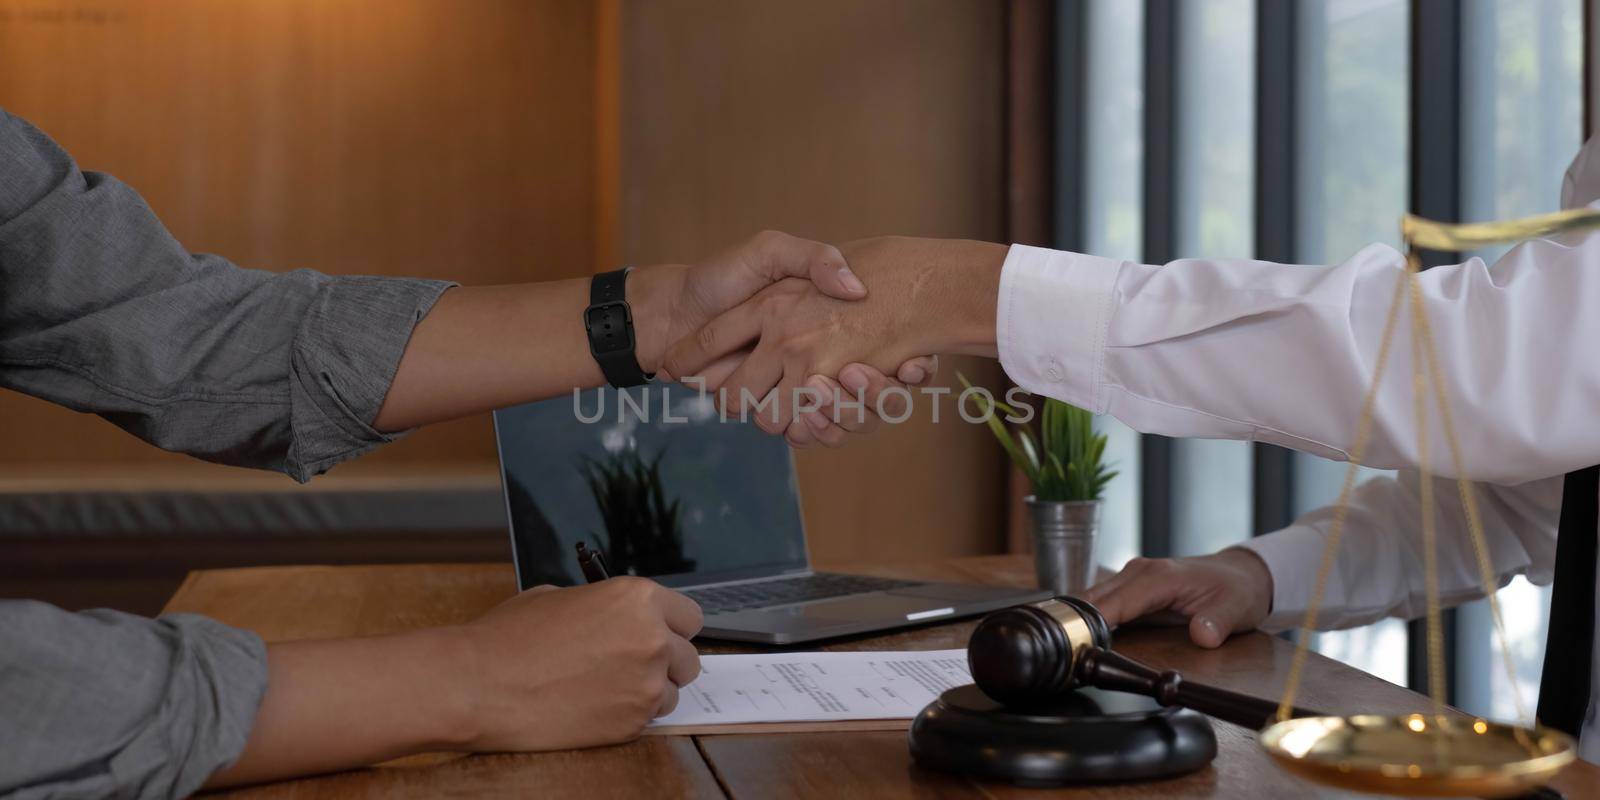 Businessman shaking hands to seal a deal with his partner lawyers or attorneys discussing a contract agreement by wichayada